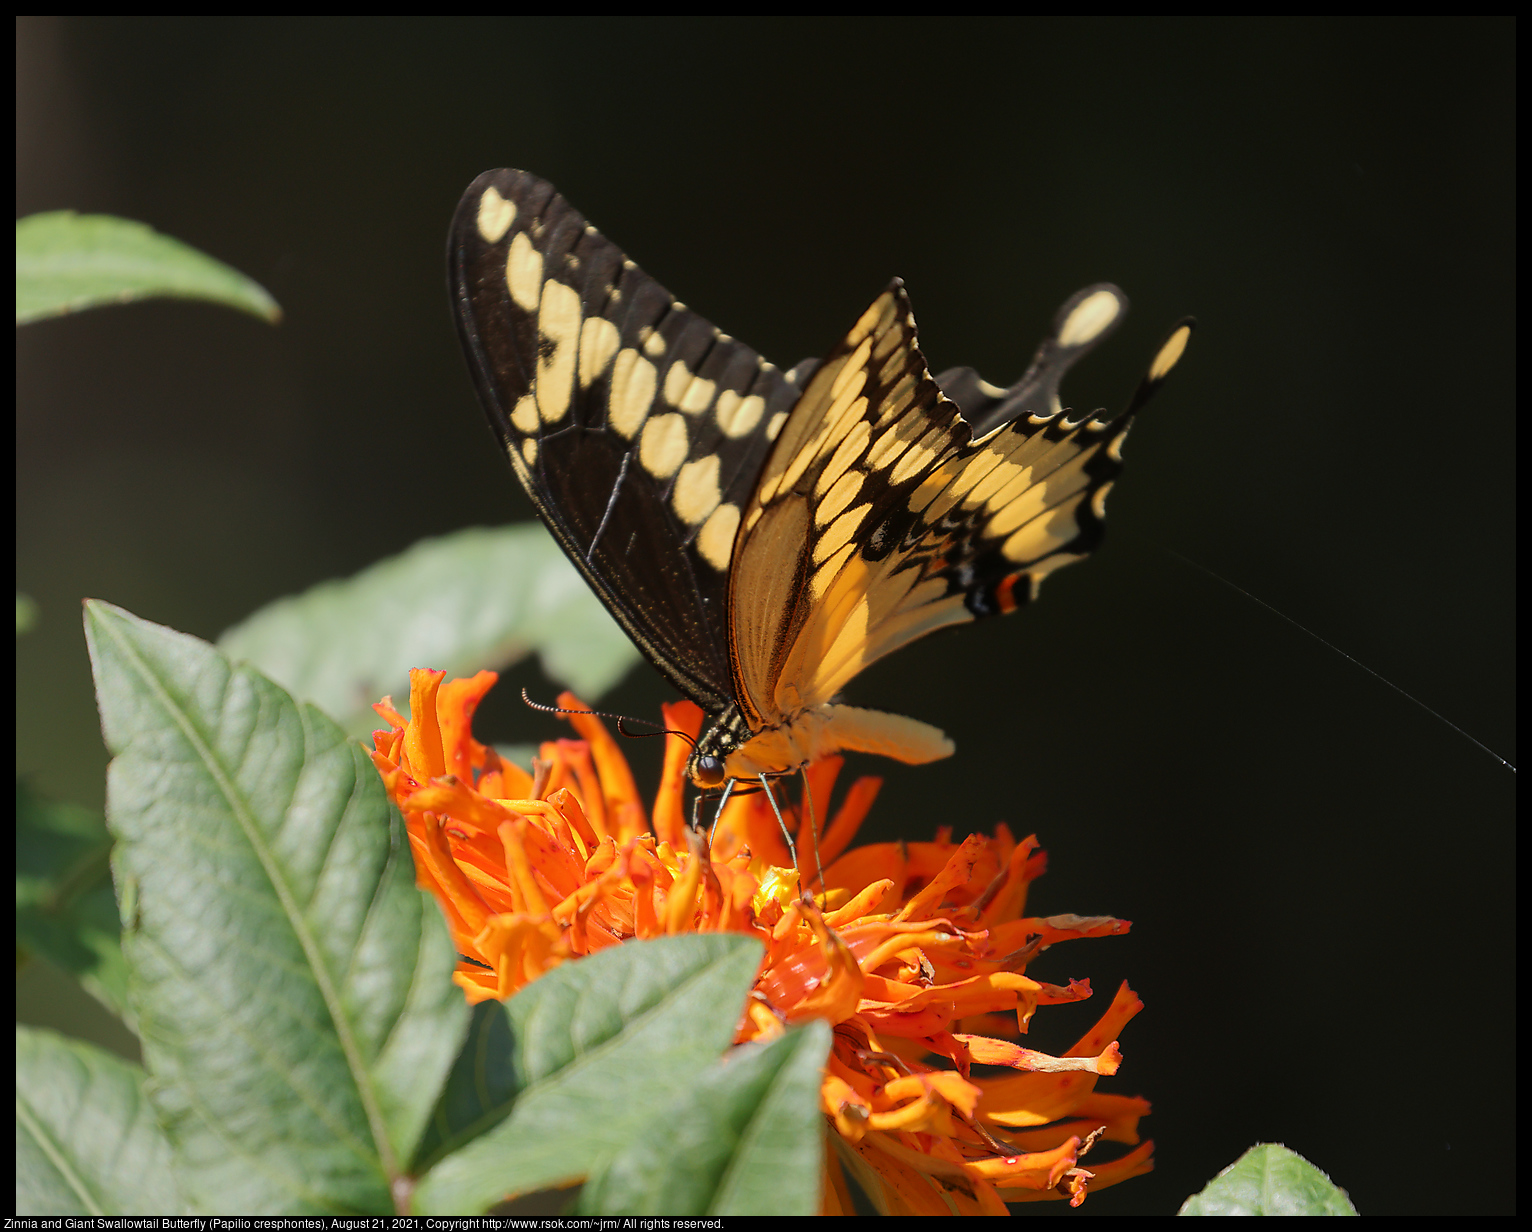 Zinnia and Giant Swallowtail Butterfly (Papilio cresphontes), August 21, 2021